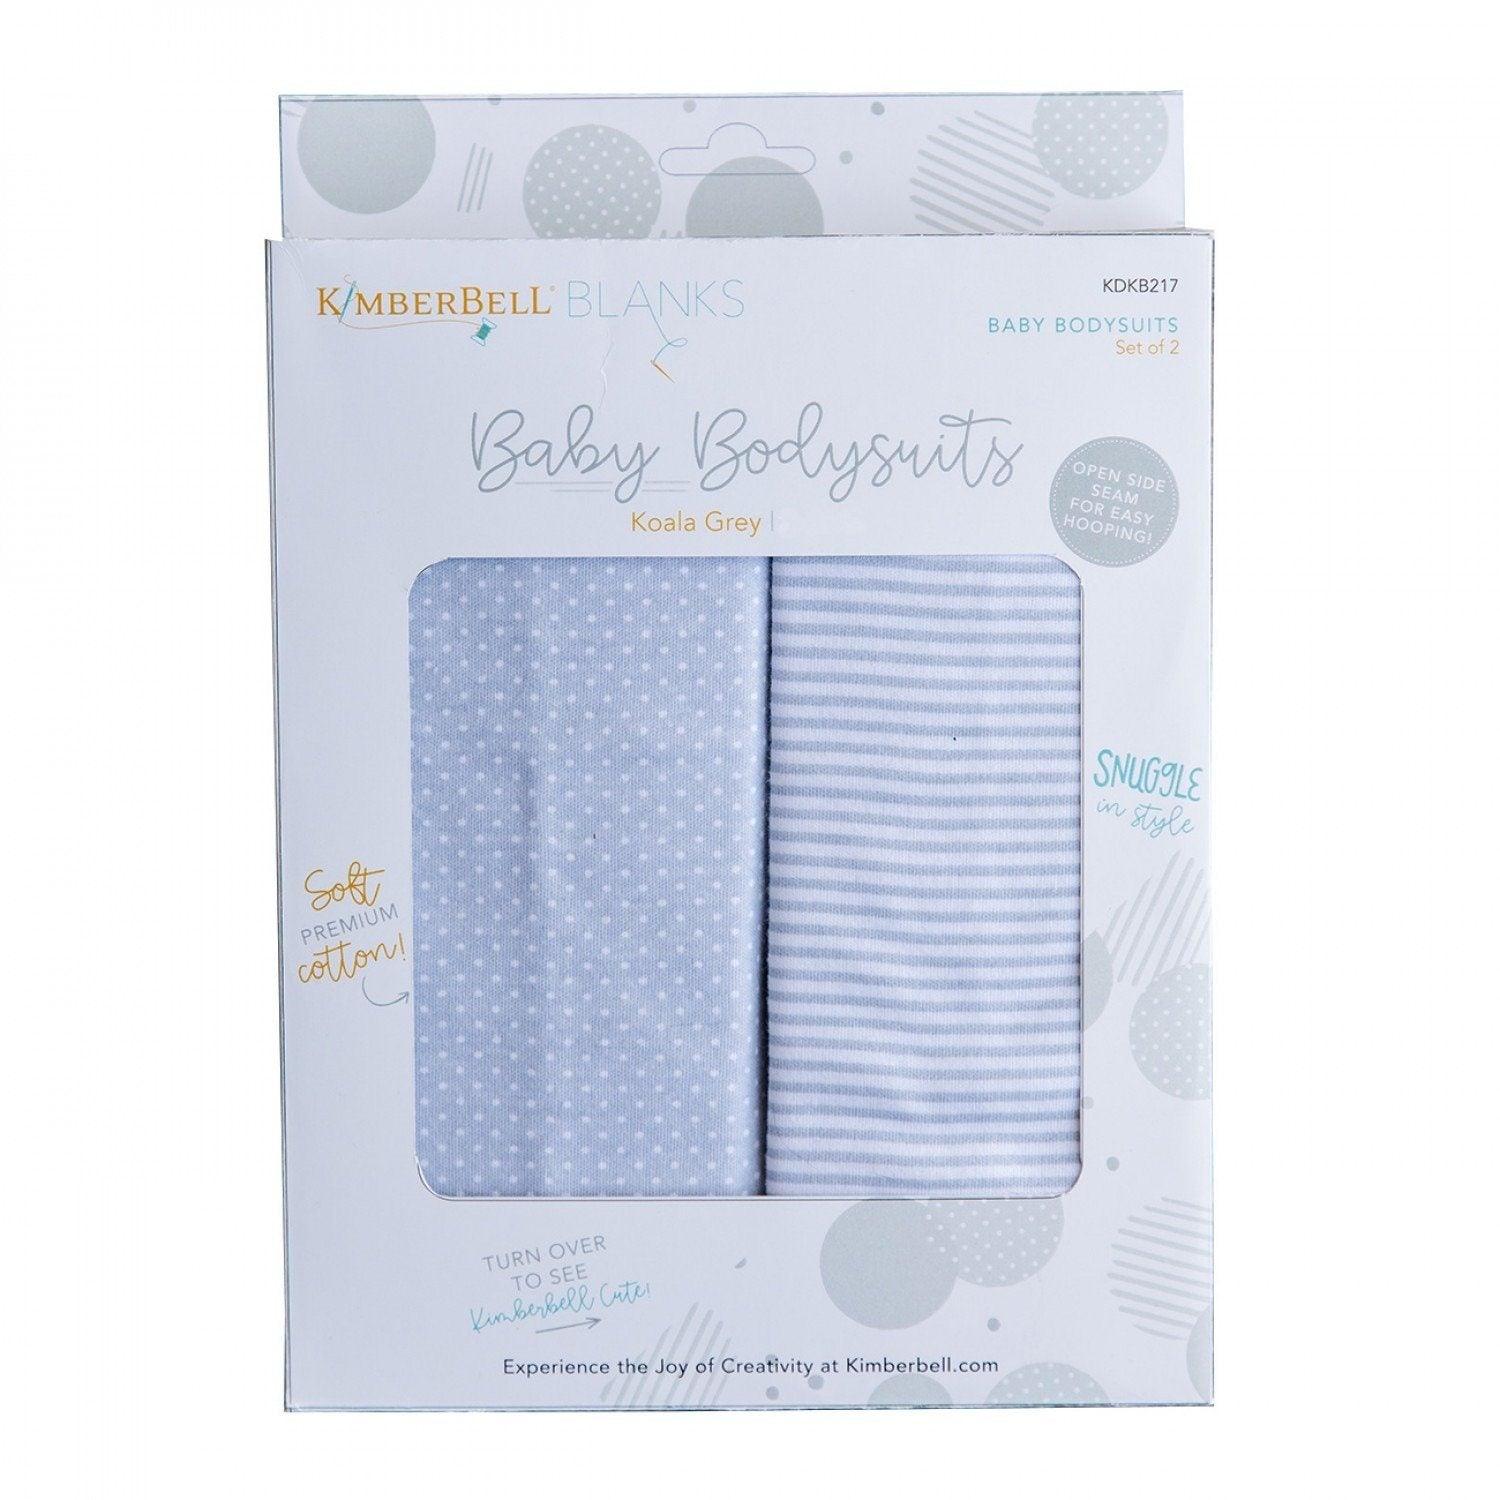 Baby Bodysuits - Koala Grey -  (3-6 Months) - Pack of 2 - Kimberbell - Kawartha Quilting and Sewing LTD.